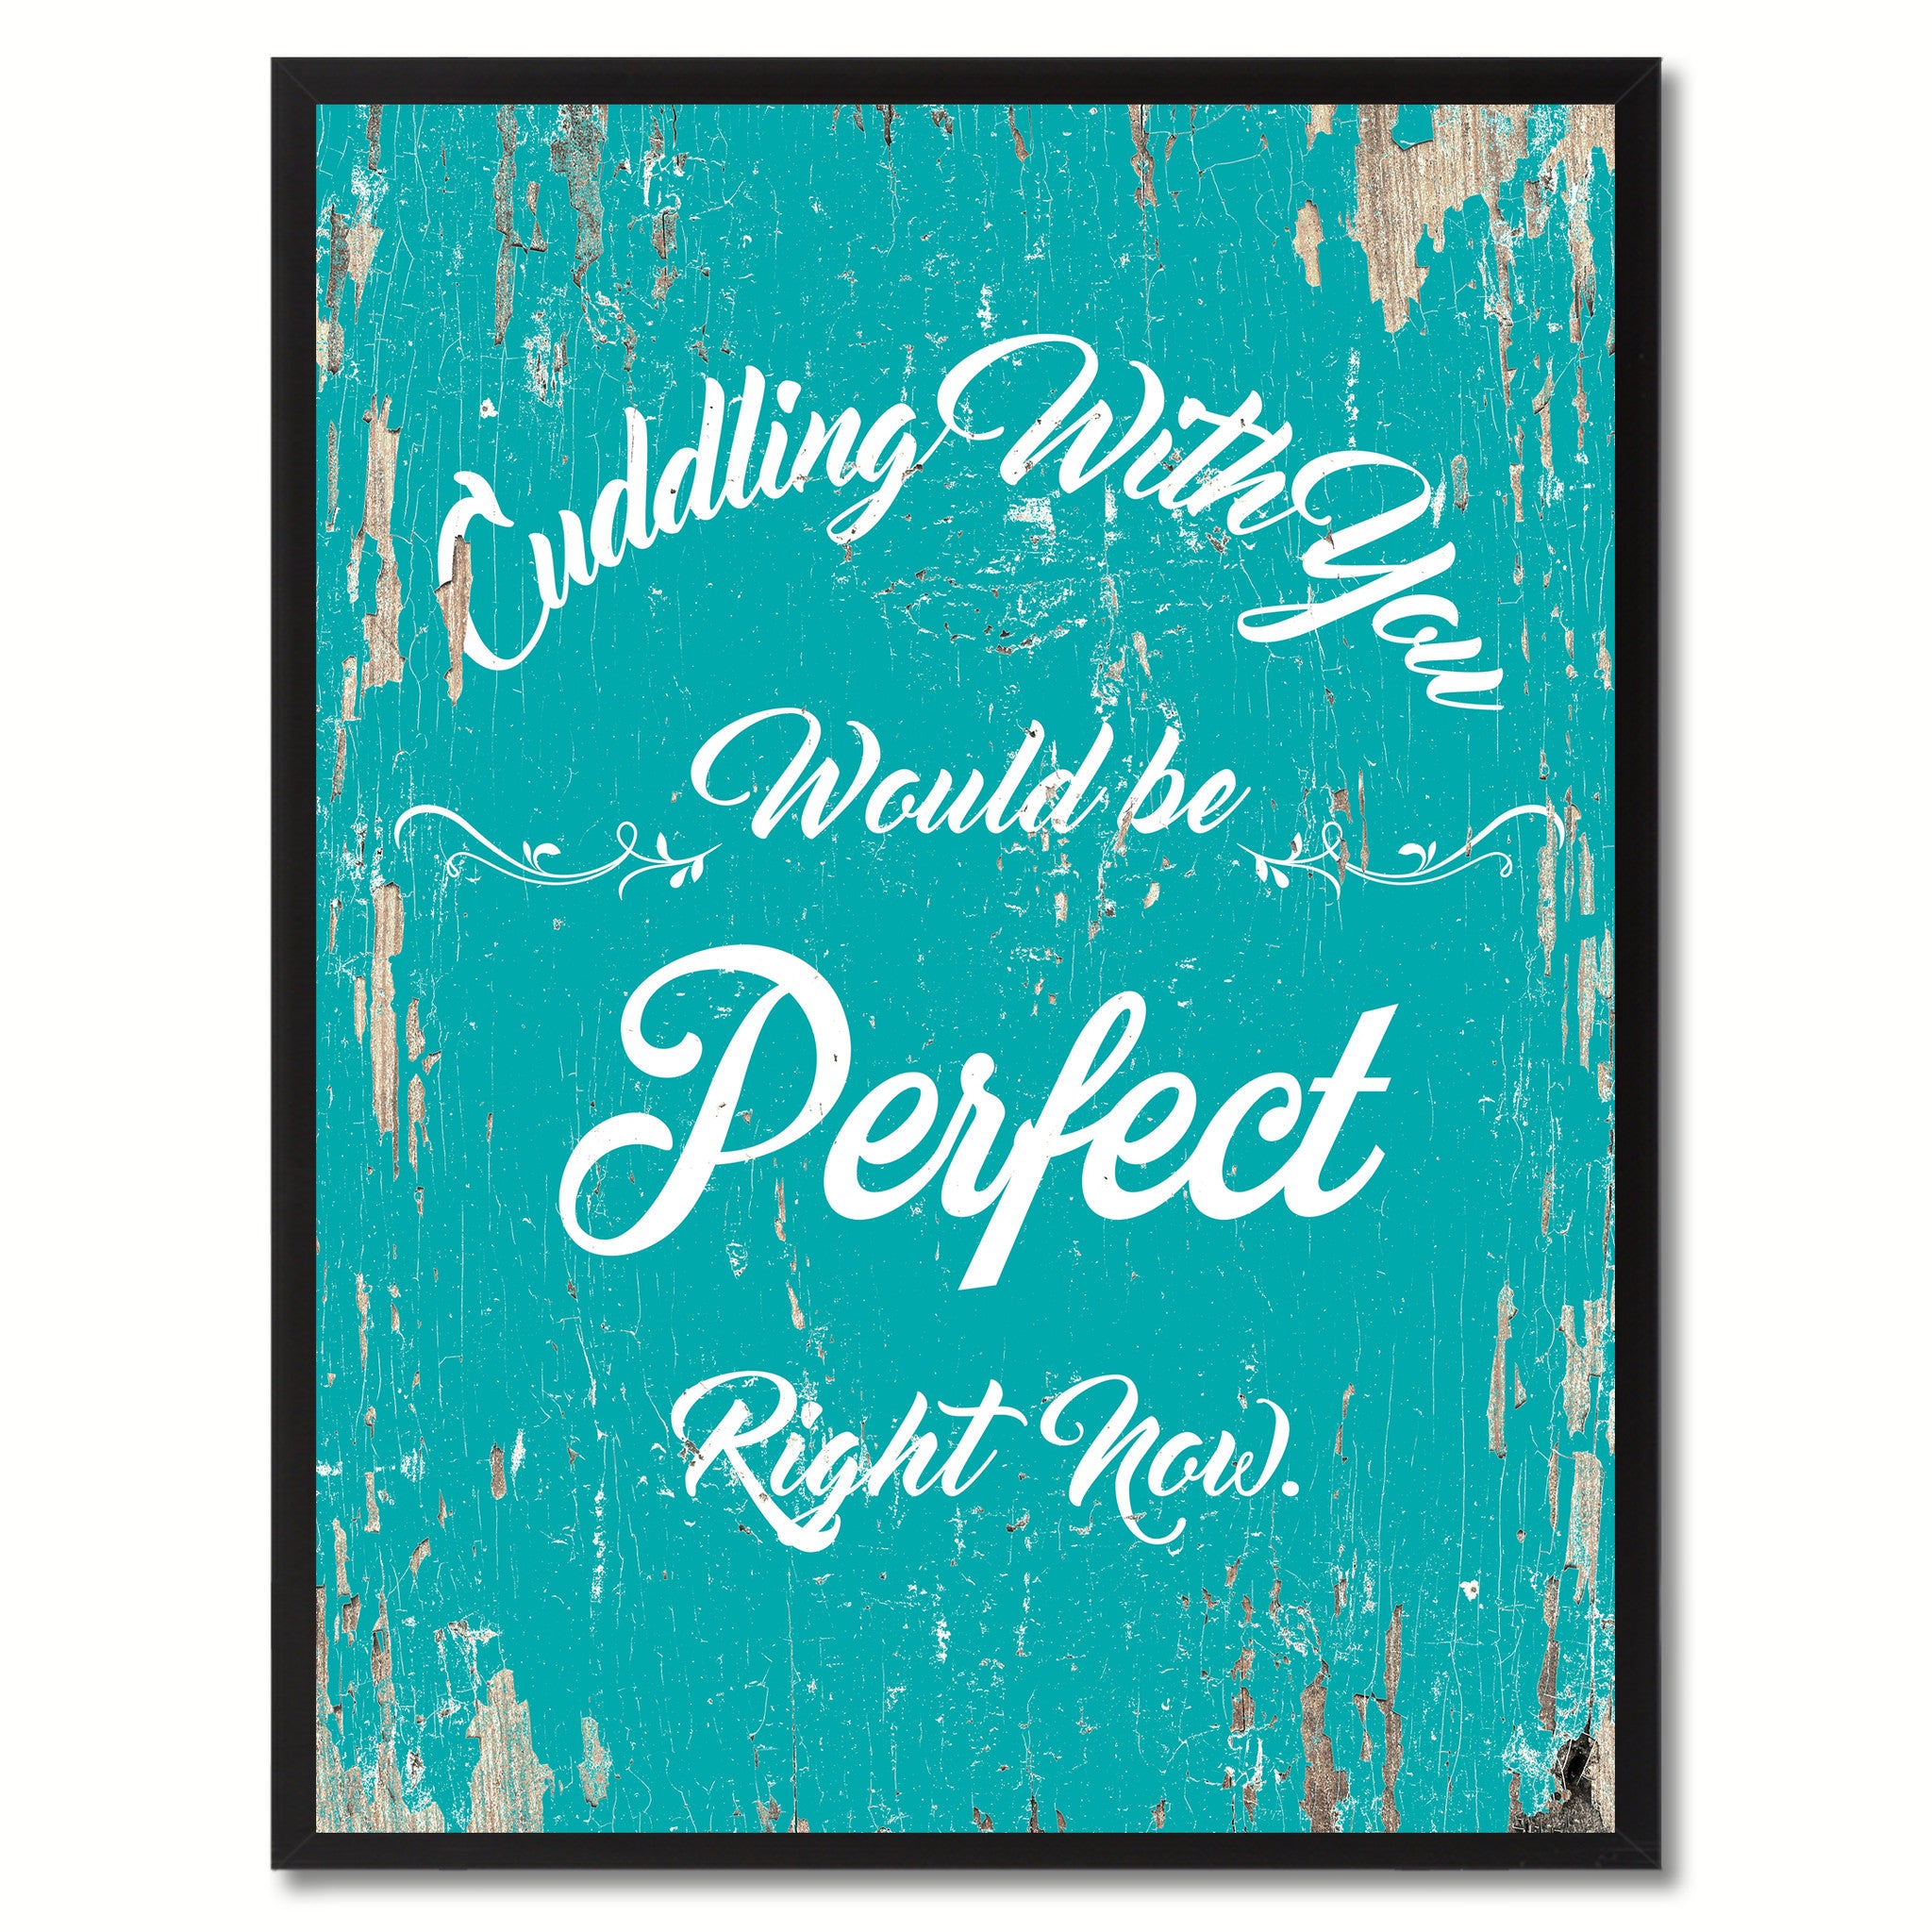 Cuddling with you would be perfect right now Happy Quote Saying Gift Ideas Home Decor Wall Art